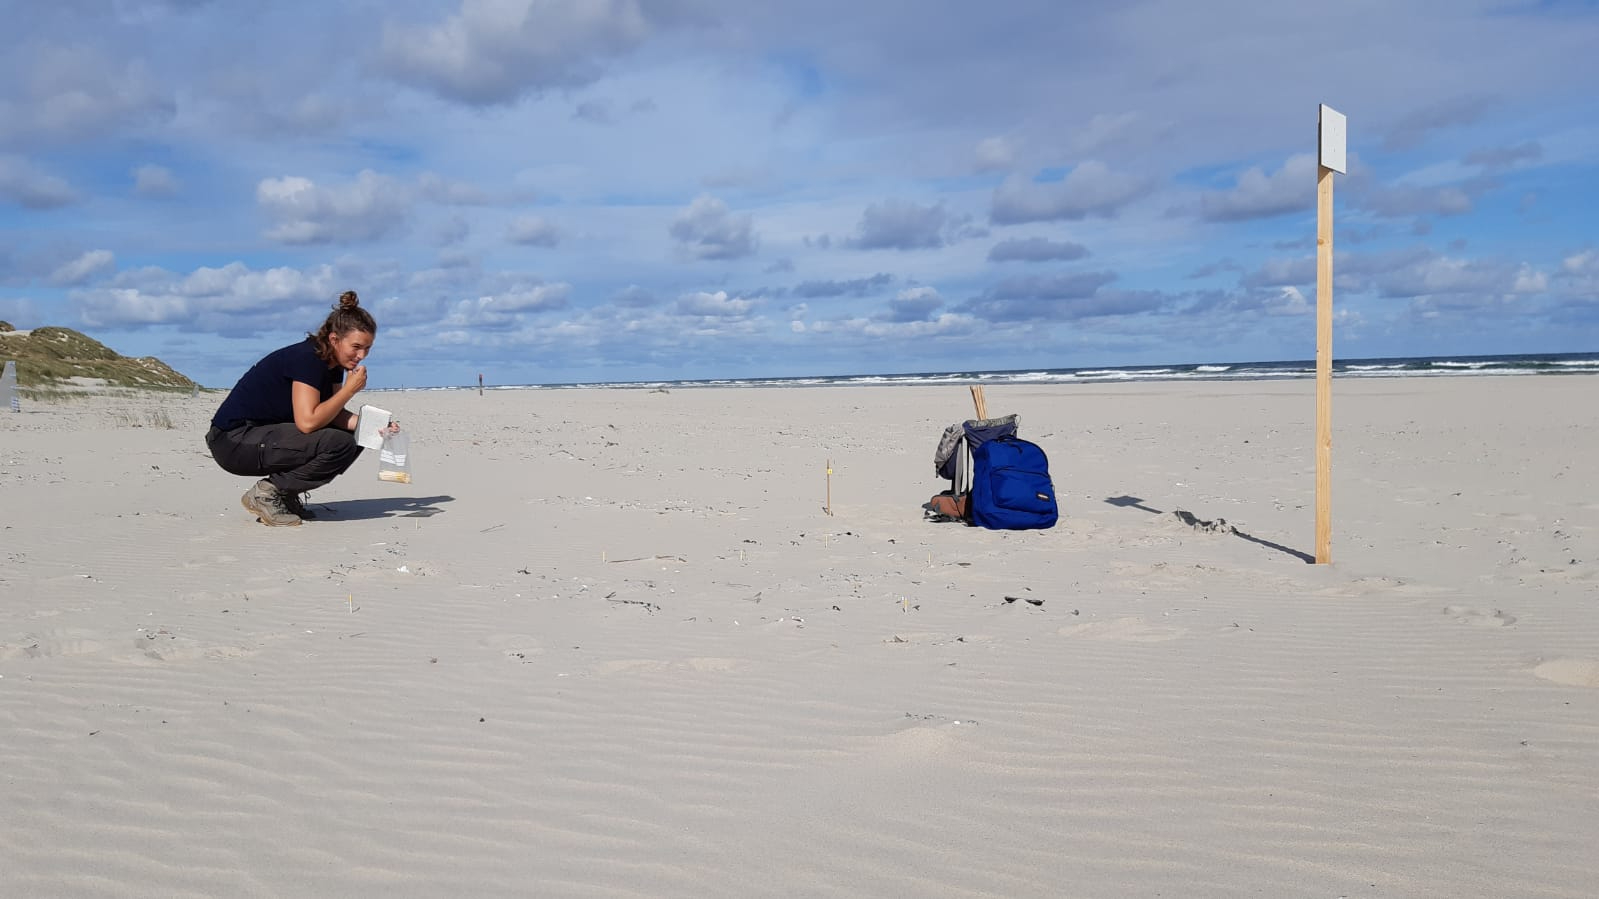 Monitoring of a field experiment on the beach of Terschelling. Photo: Eva Lansu